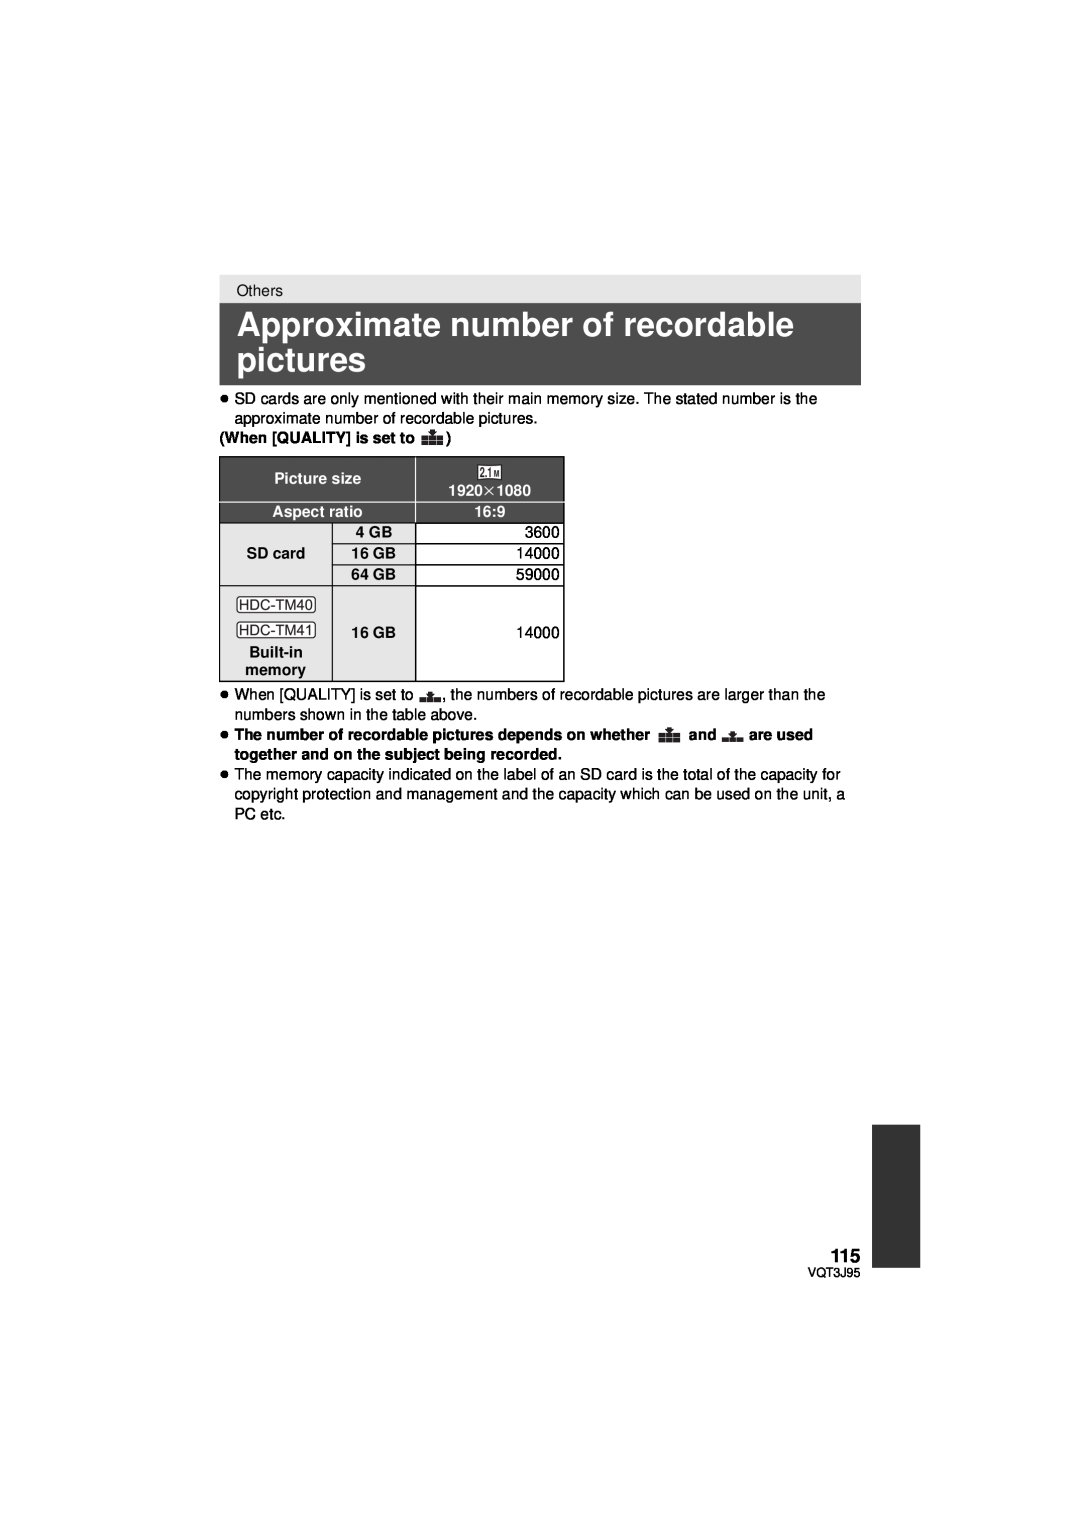 Panasonic HDC-TM41P/PC Approximate number of recordable pictures, When QUALITY is set to, 3600, SD card, 14000, 59000 